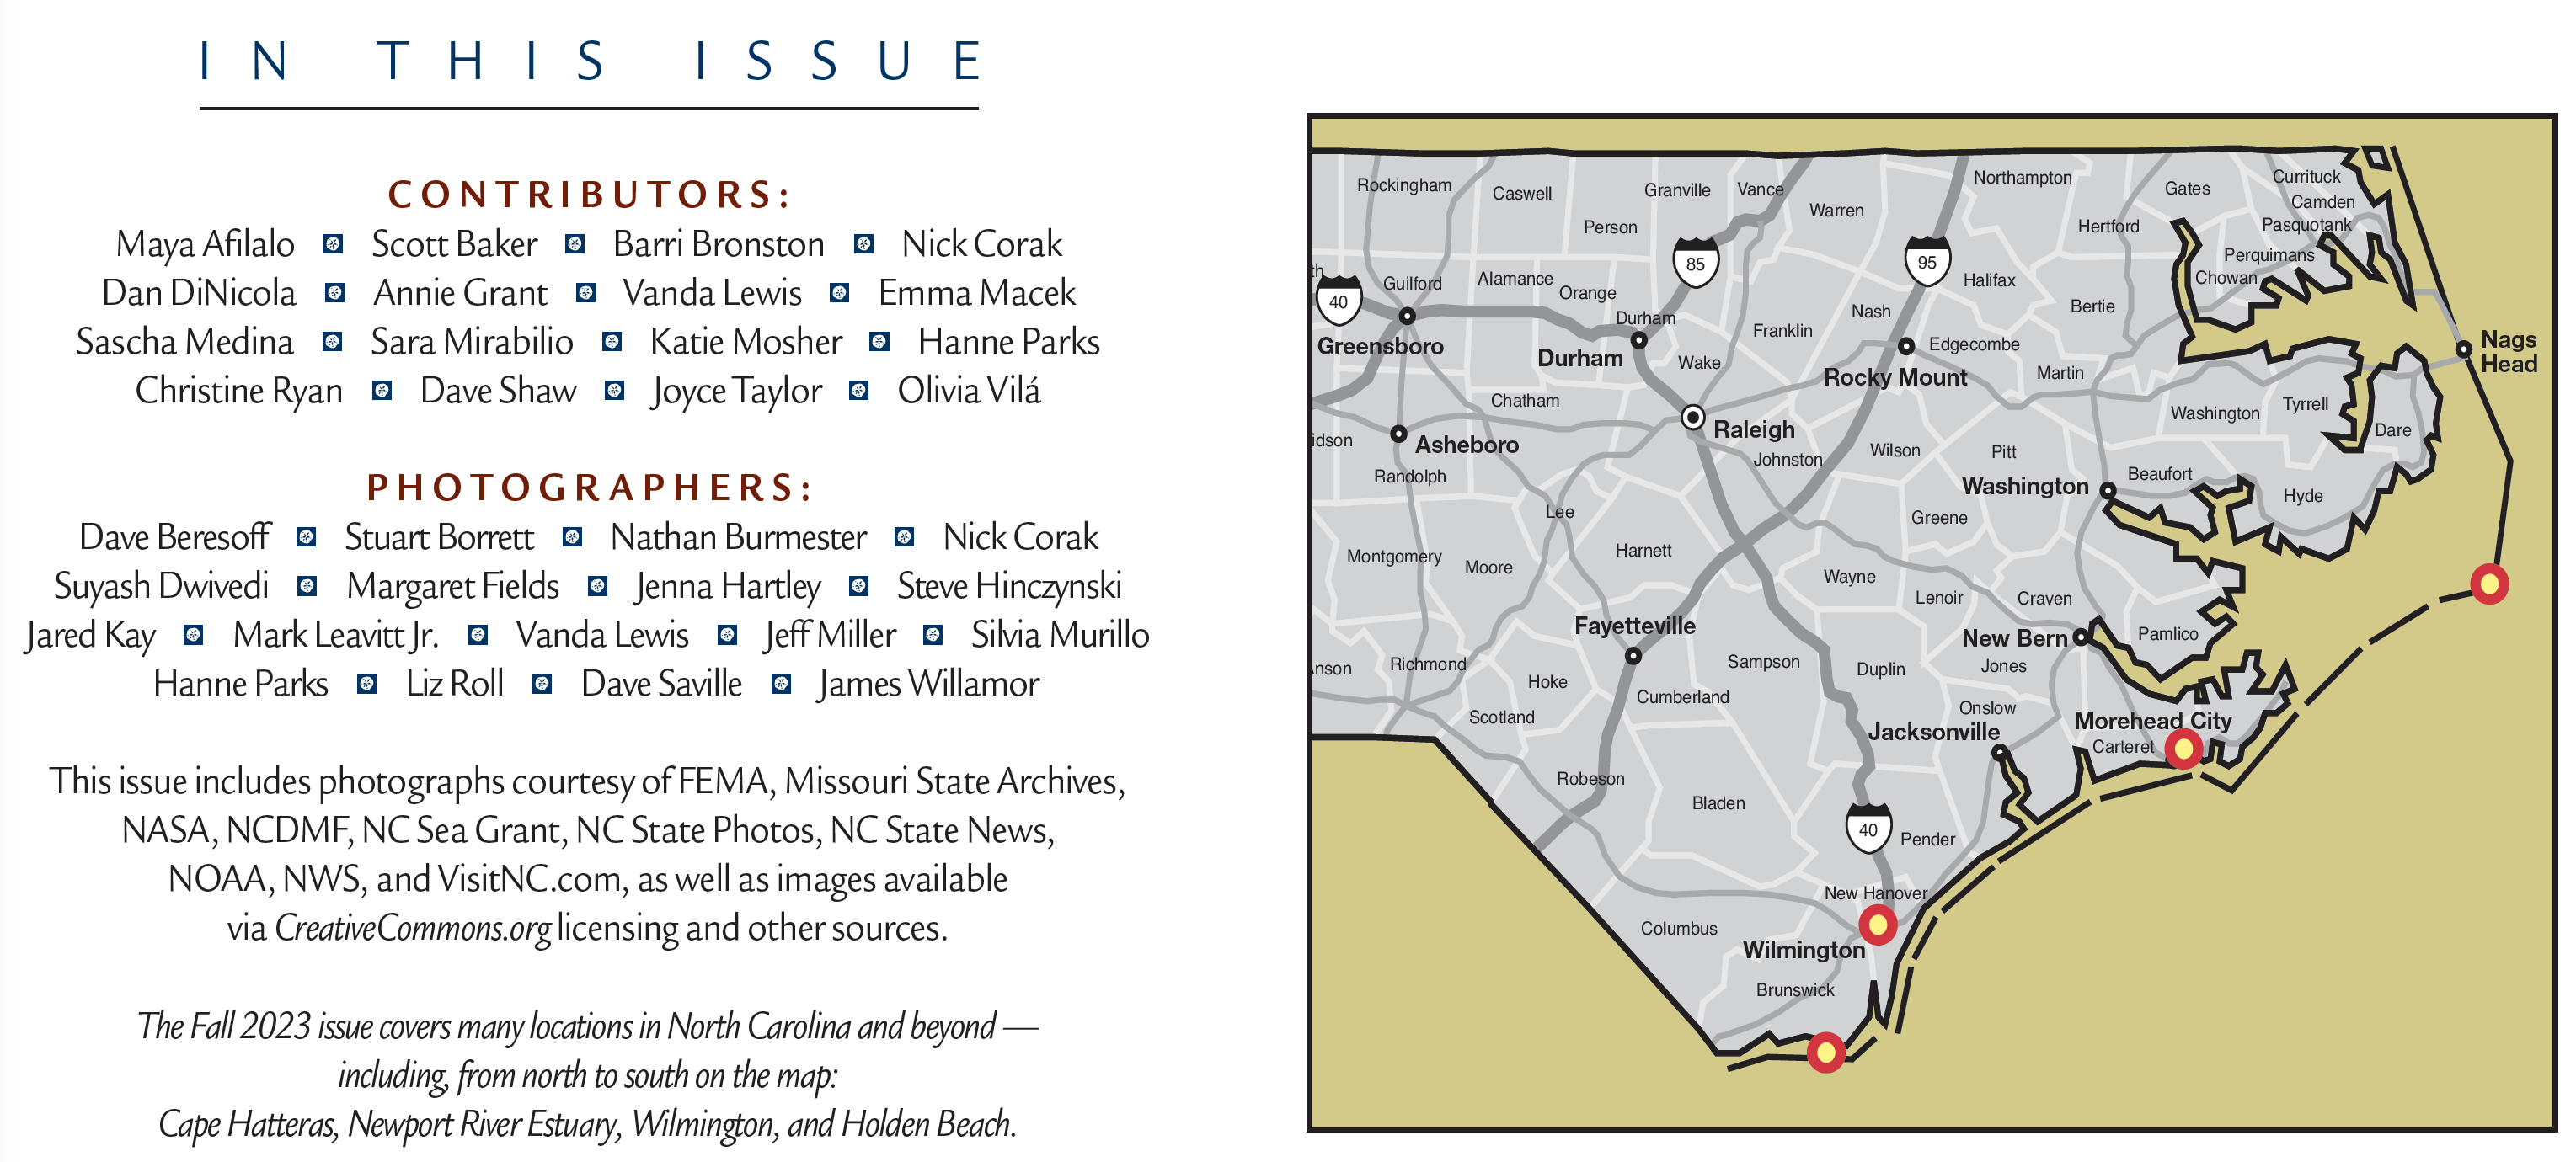 image: contributors and photographers with NC map.